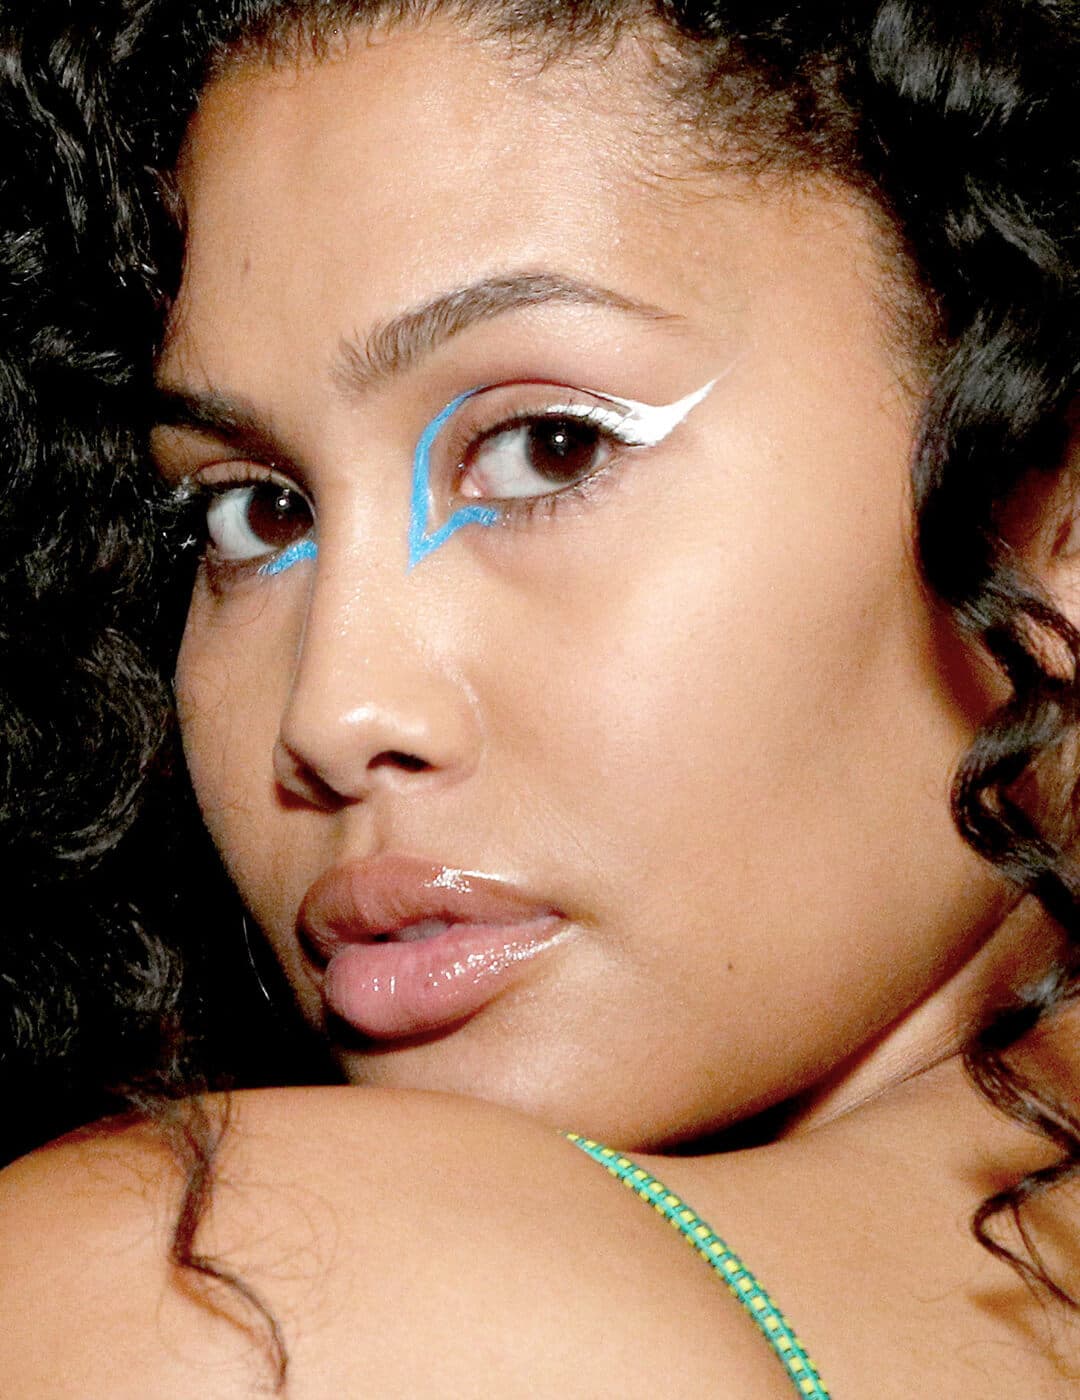 Leyna Bloom rocking a graphic blue and white eyeliner makeup look